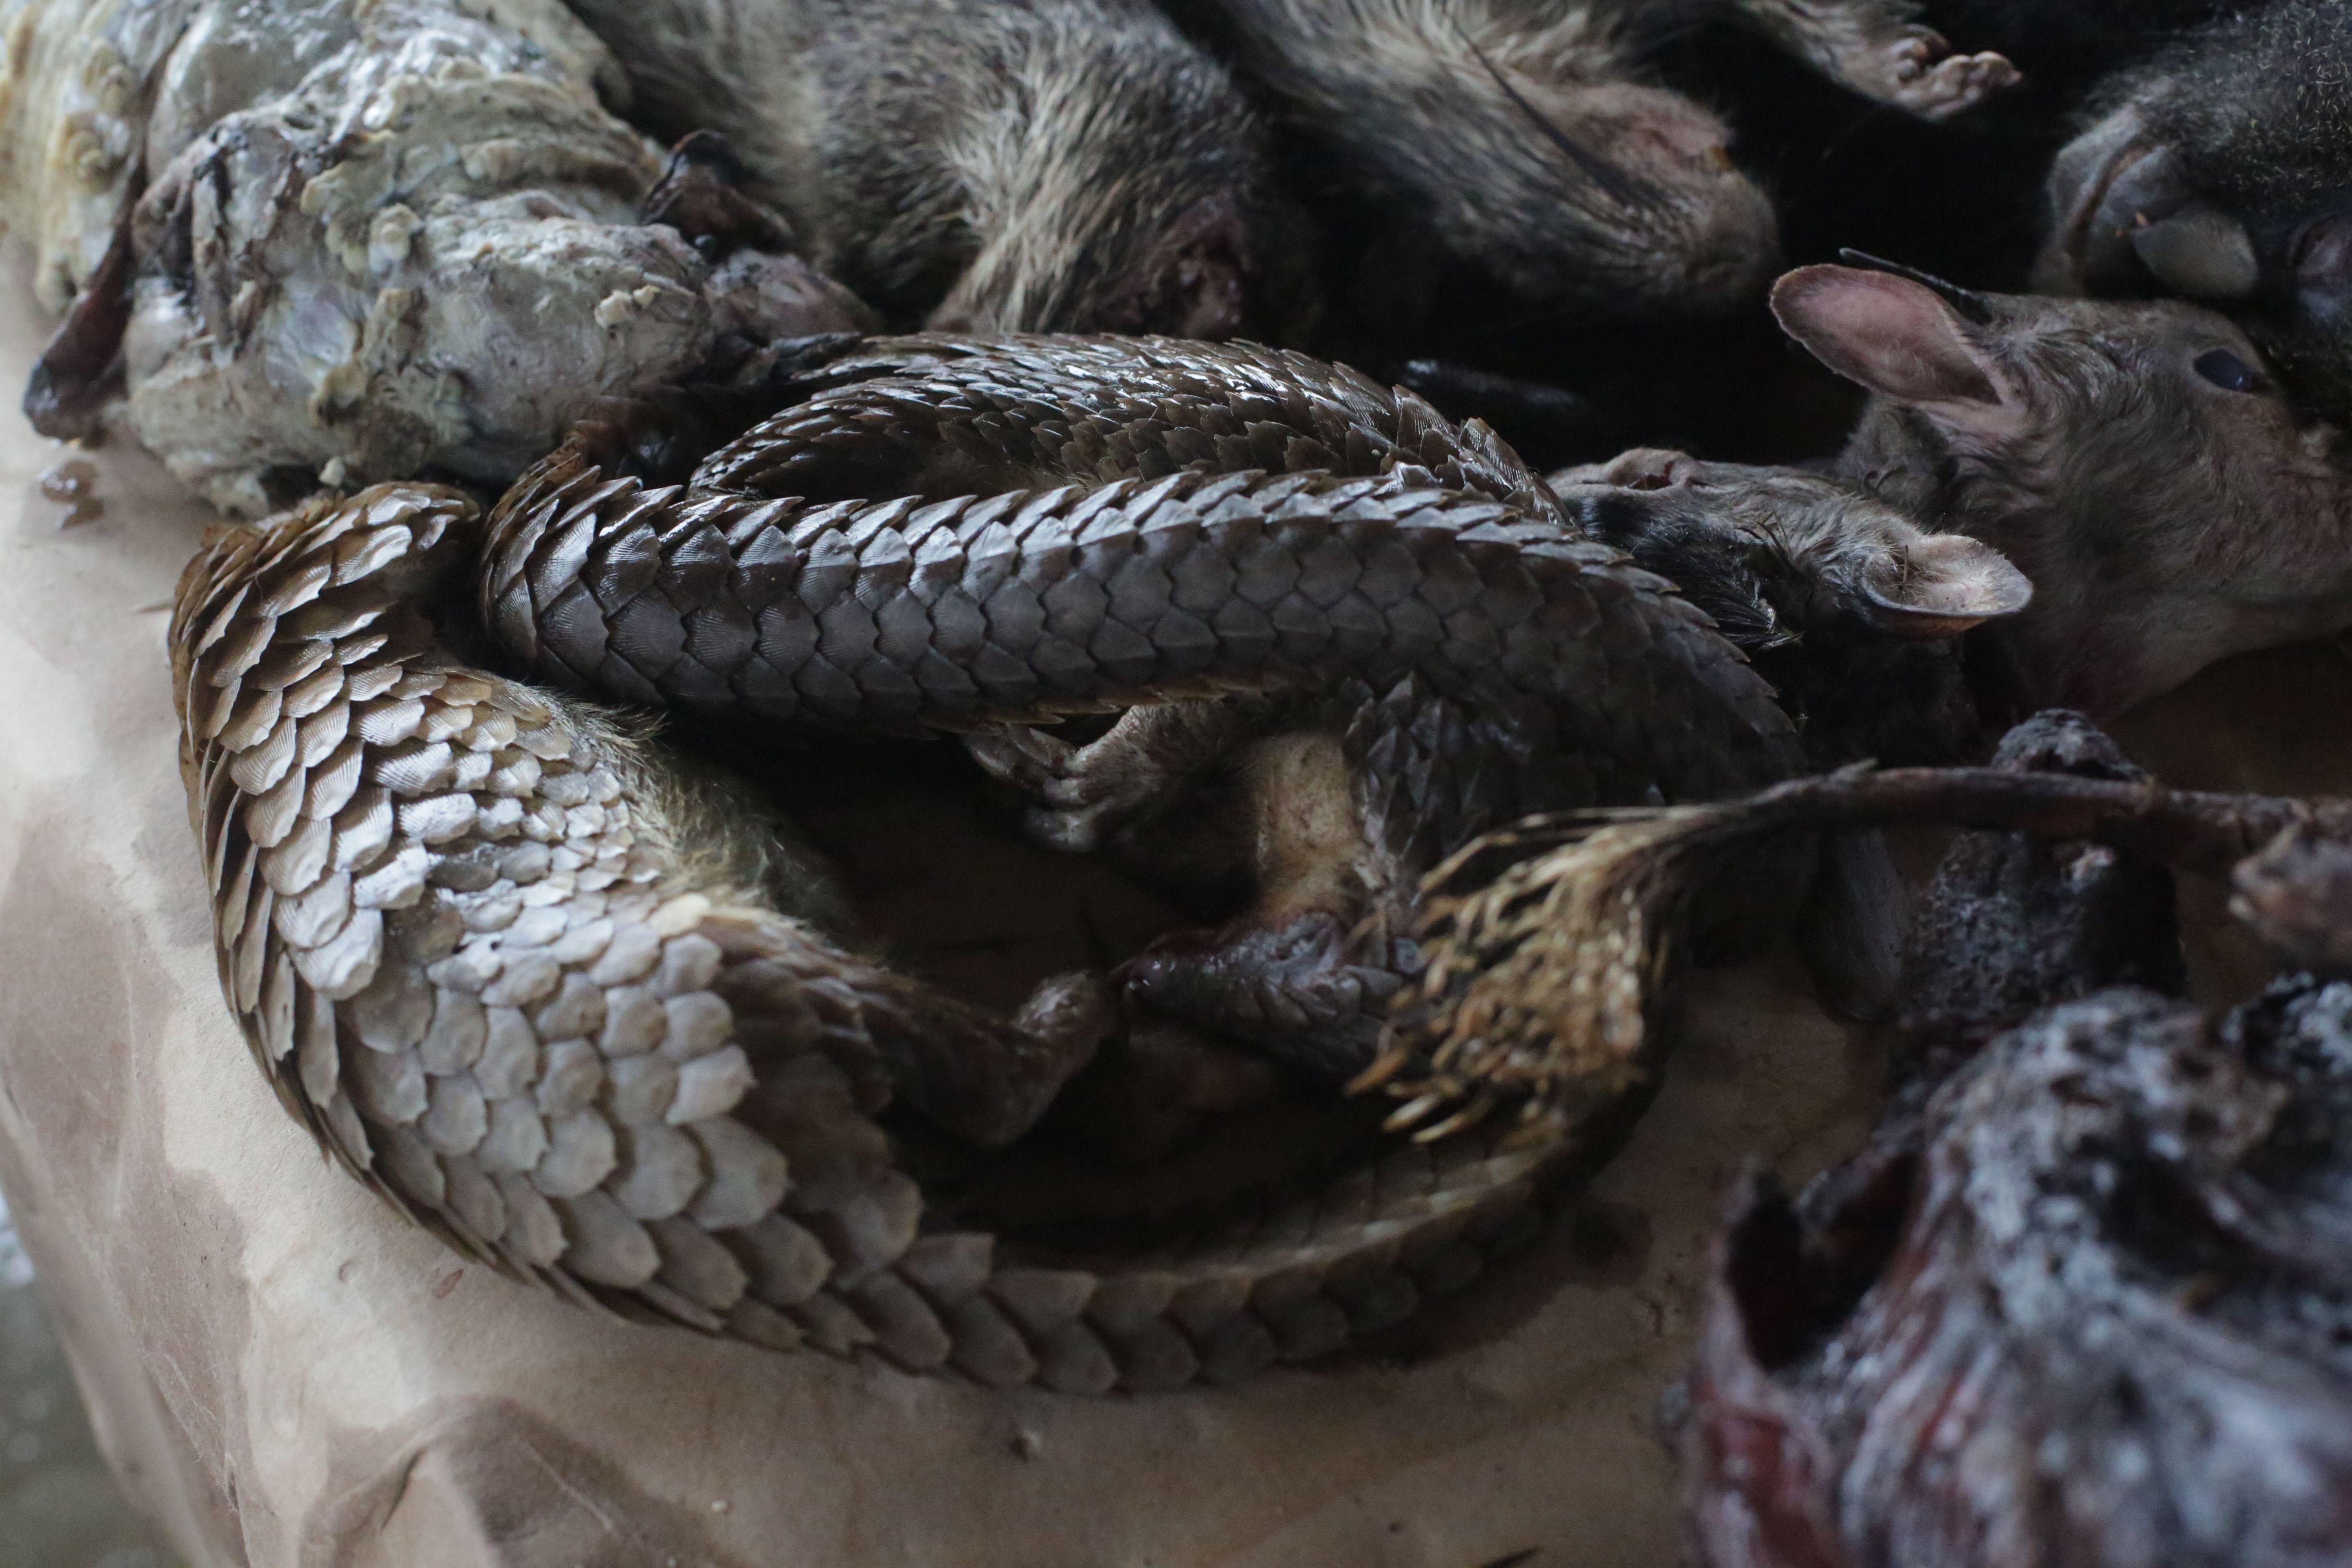 Pangolins seen for sale at a market.